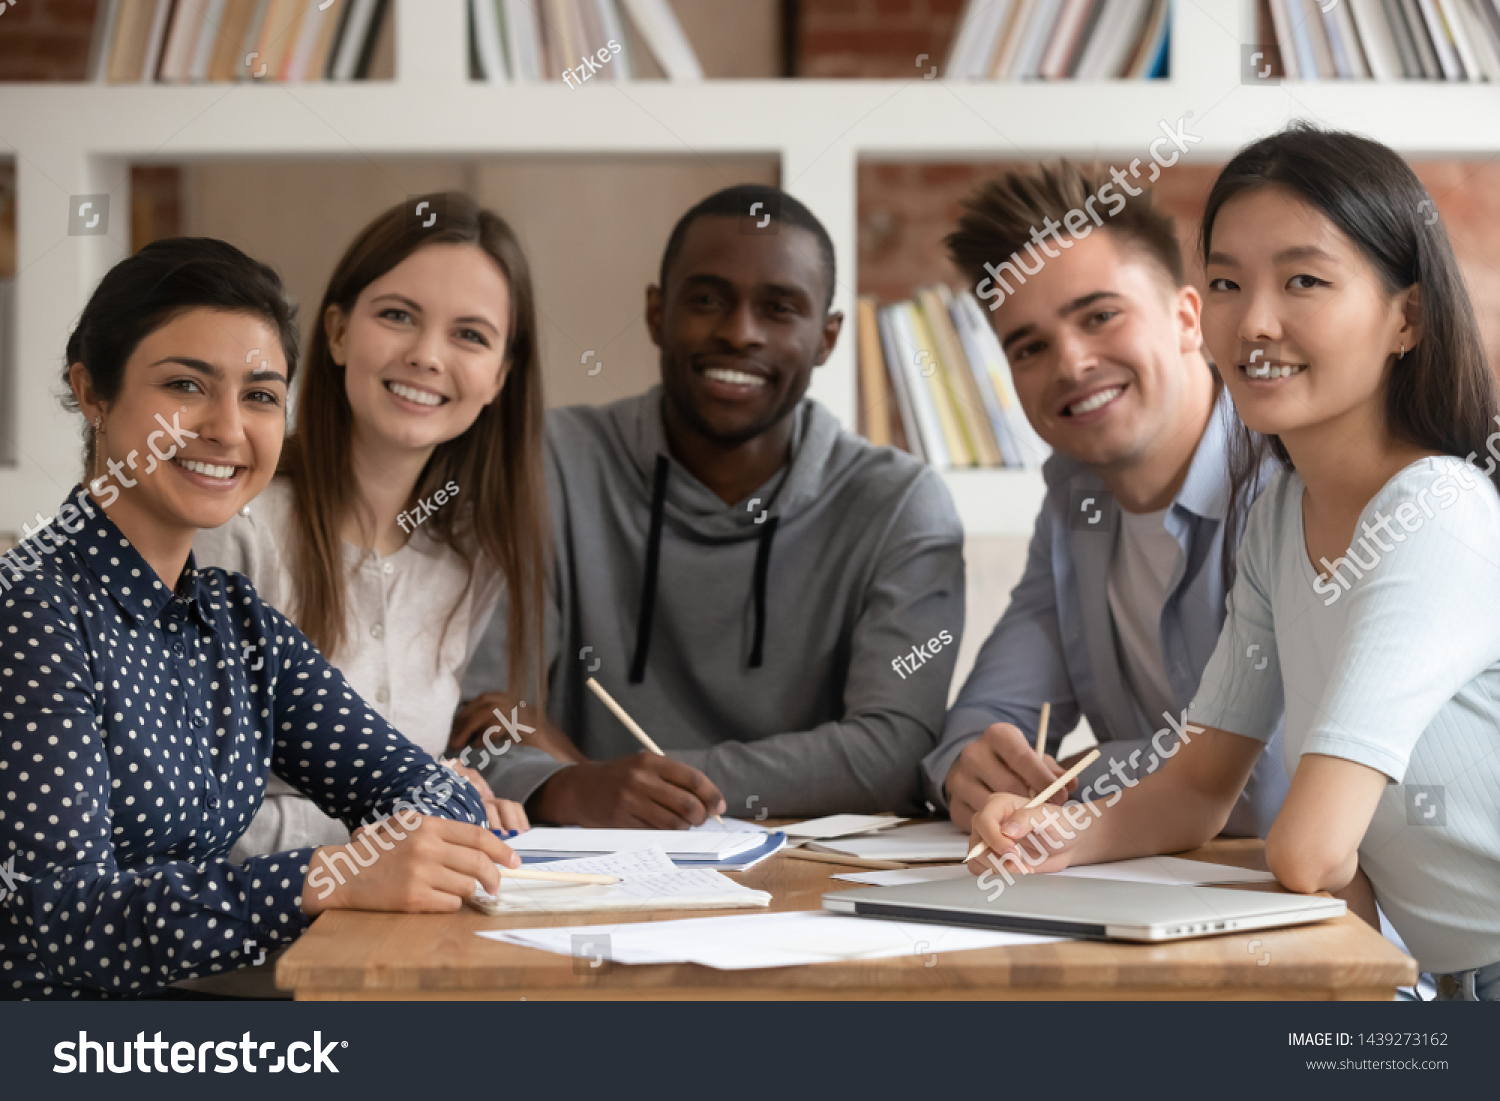 Group picture of happy multiethnic young people sit at shared desk look at camera studying together, multicultural excited students or groupmates smiling posing for photo working in library #1439273162